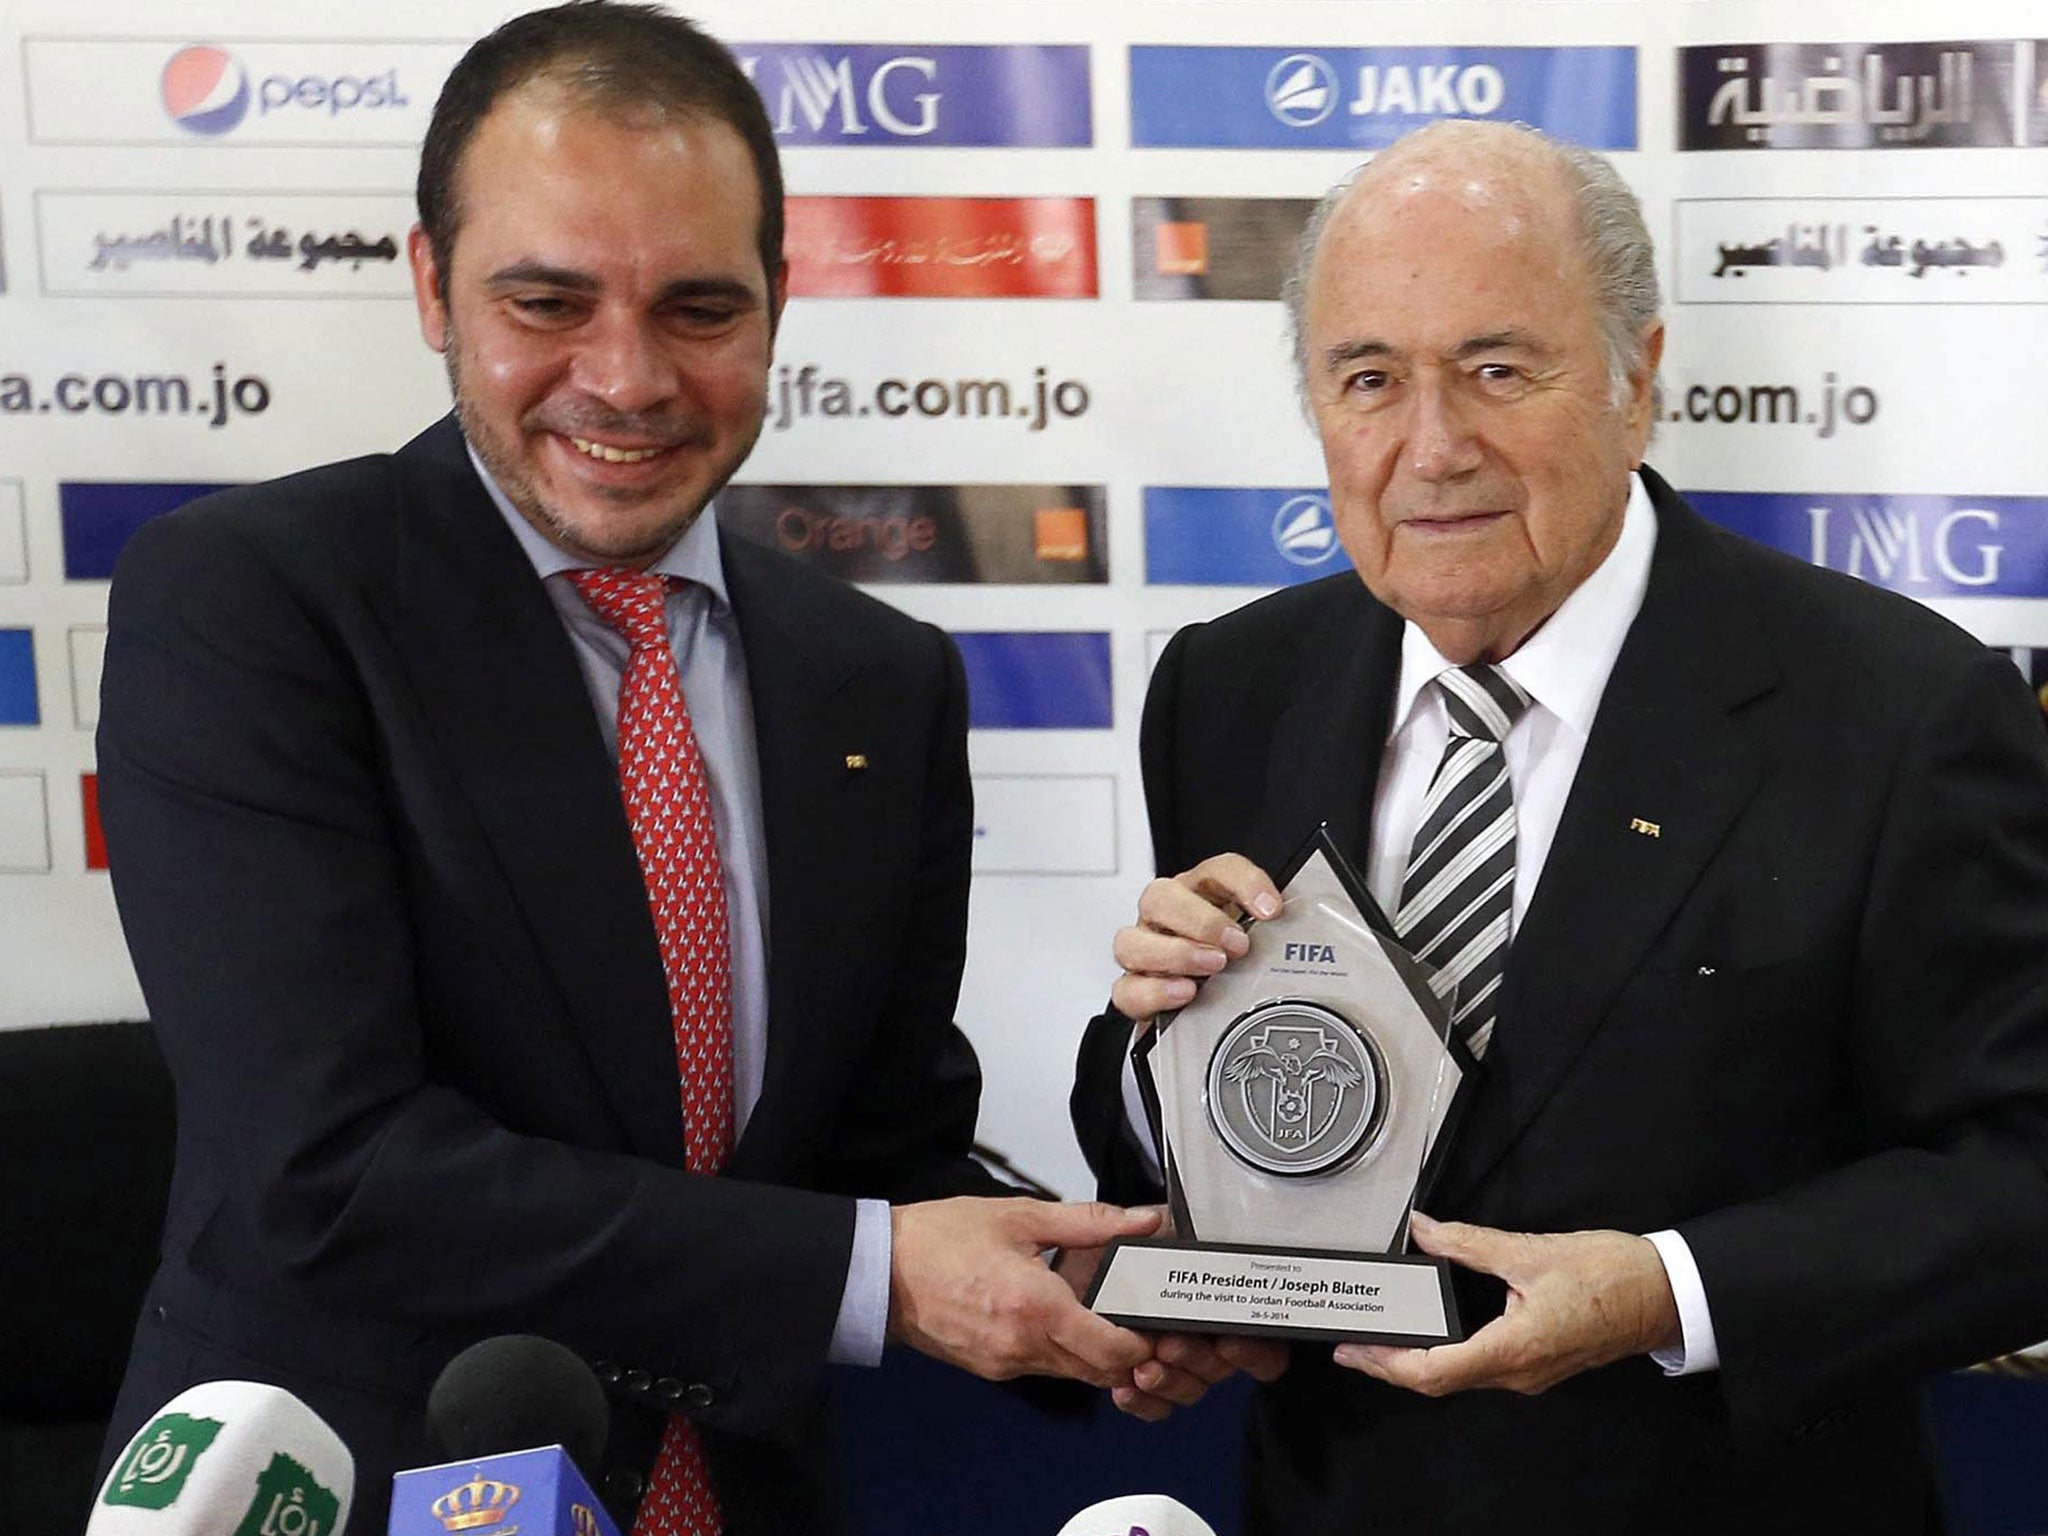 Prince Ali with Blatter in 2014